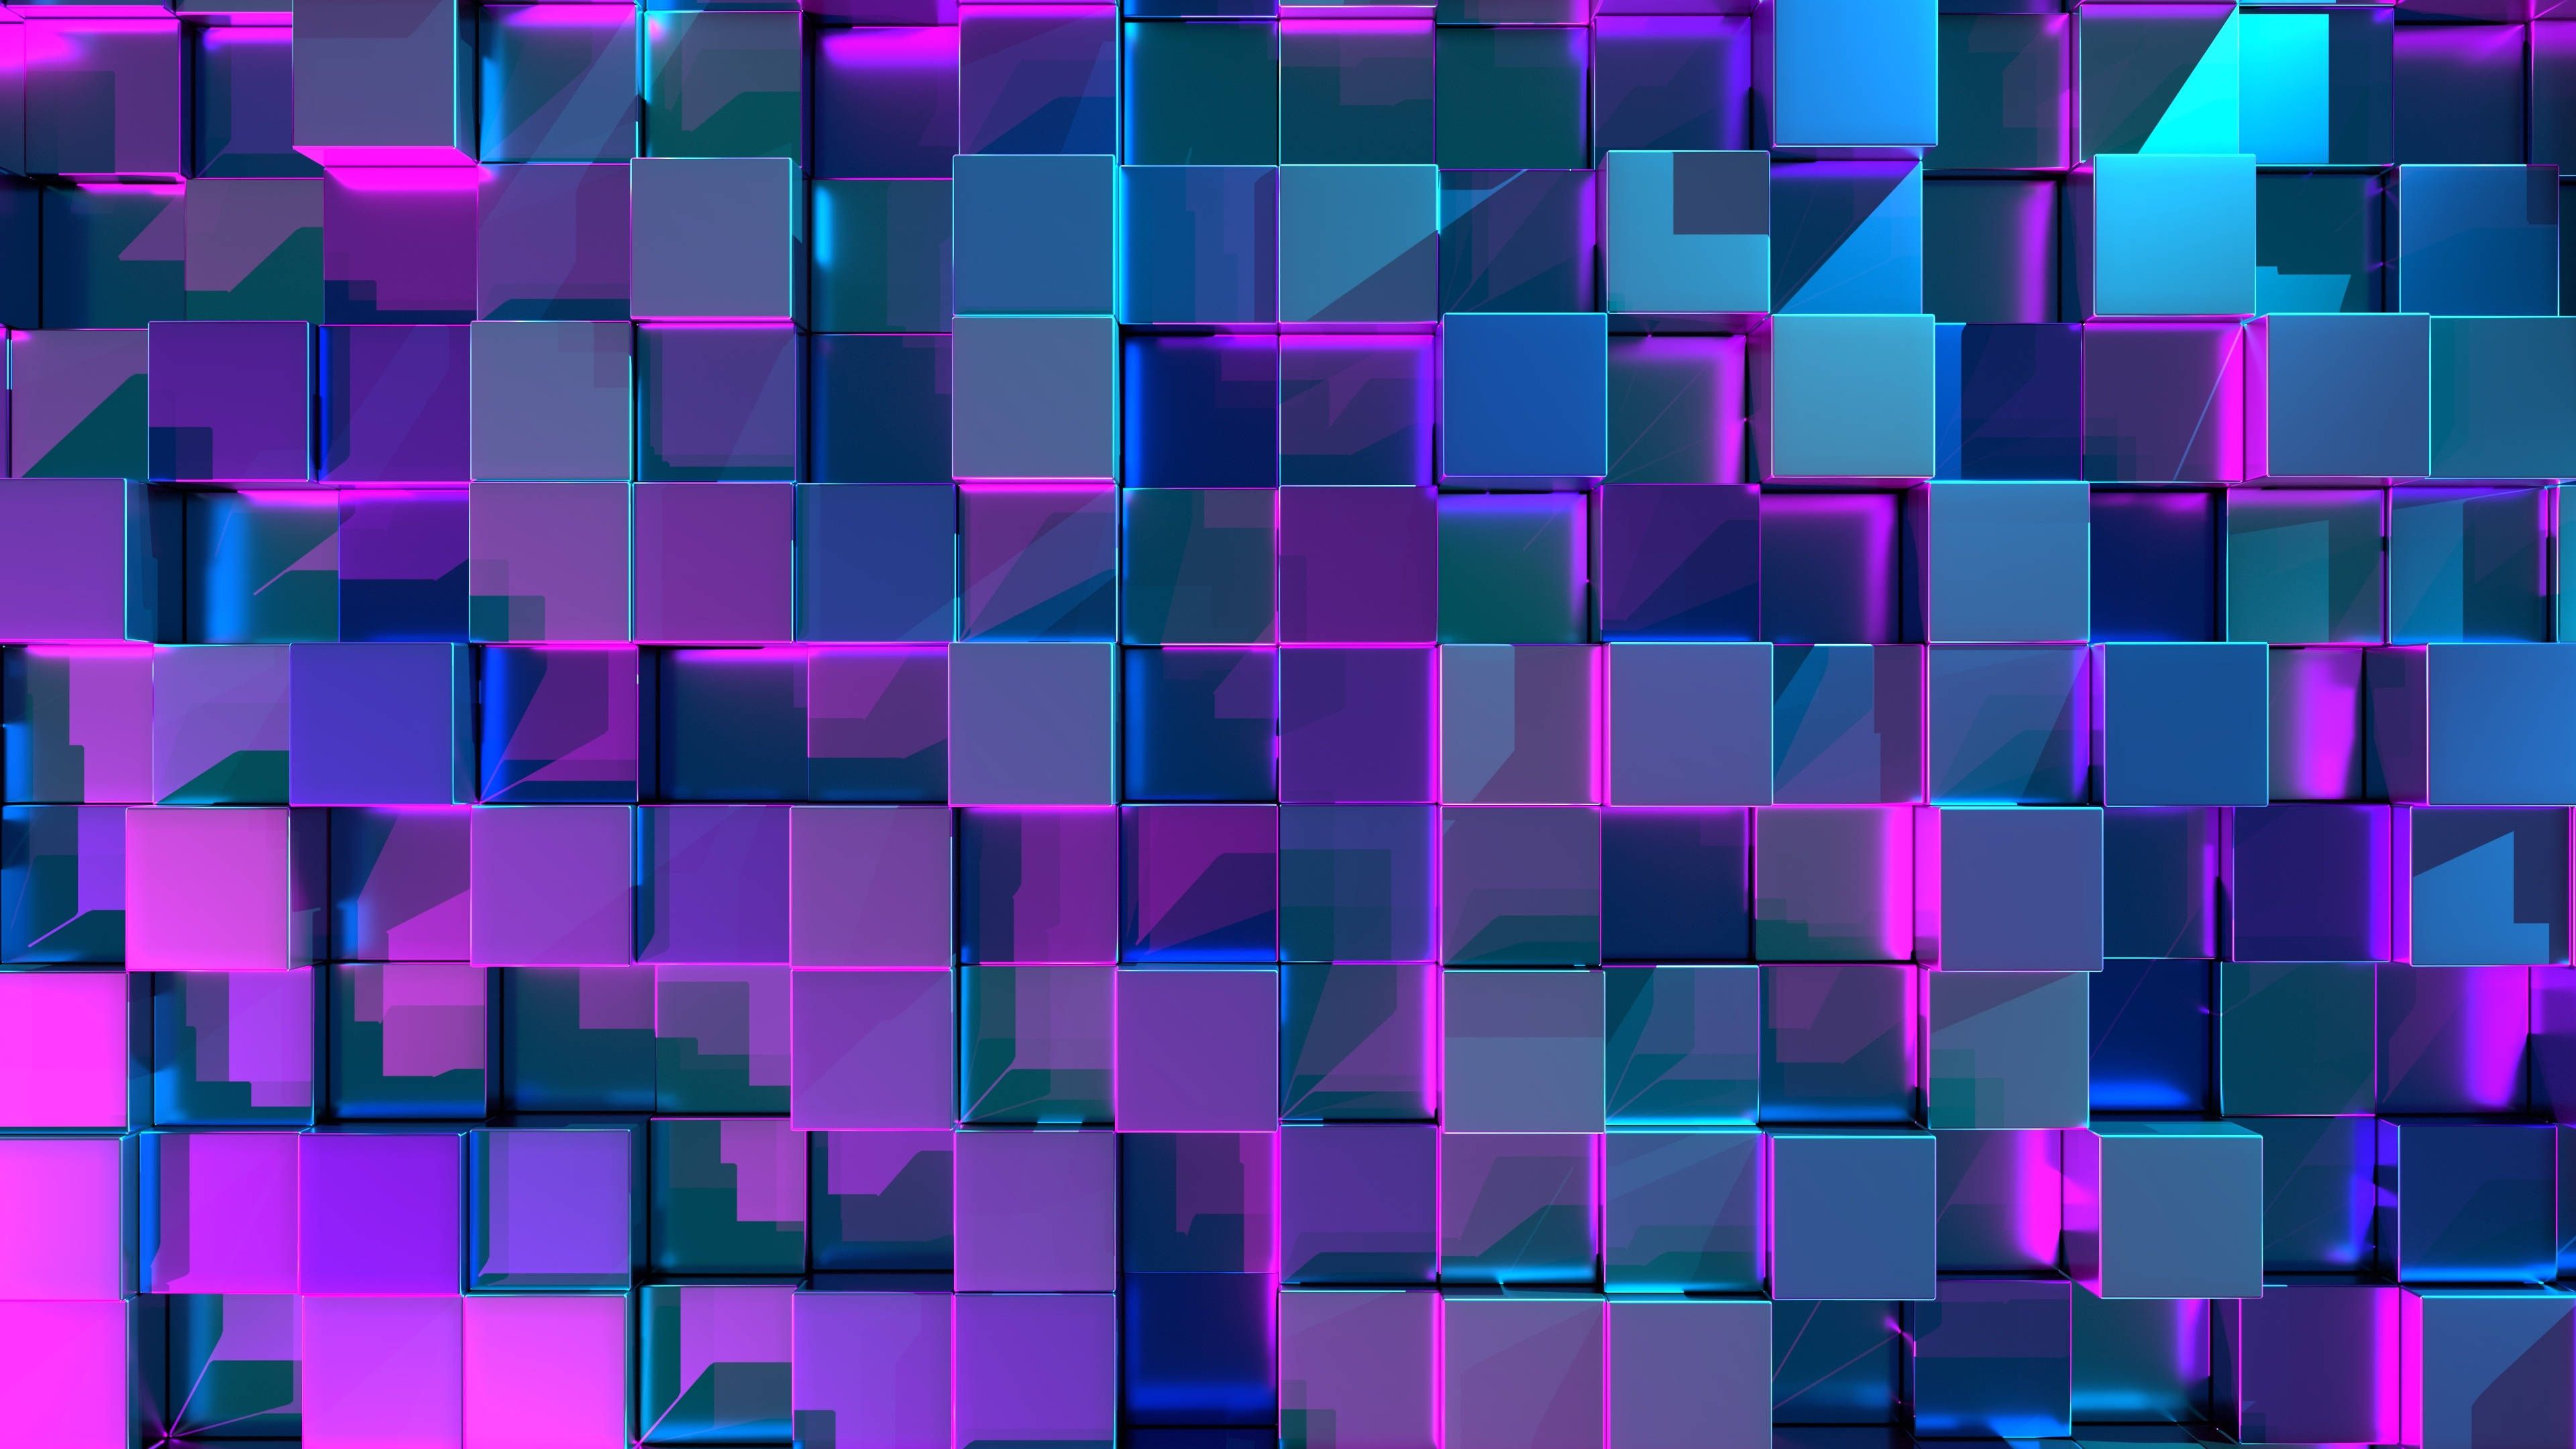 3D wallpaper with blue and purple cubes. - 3D